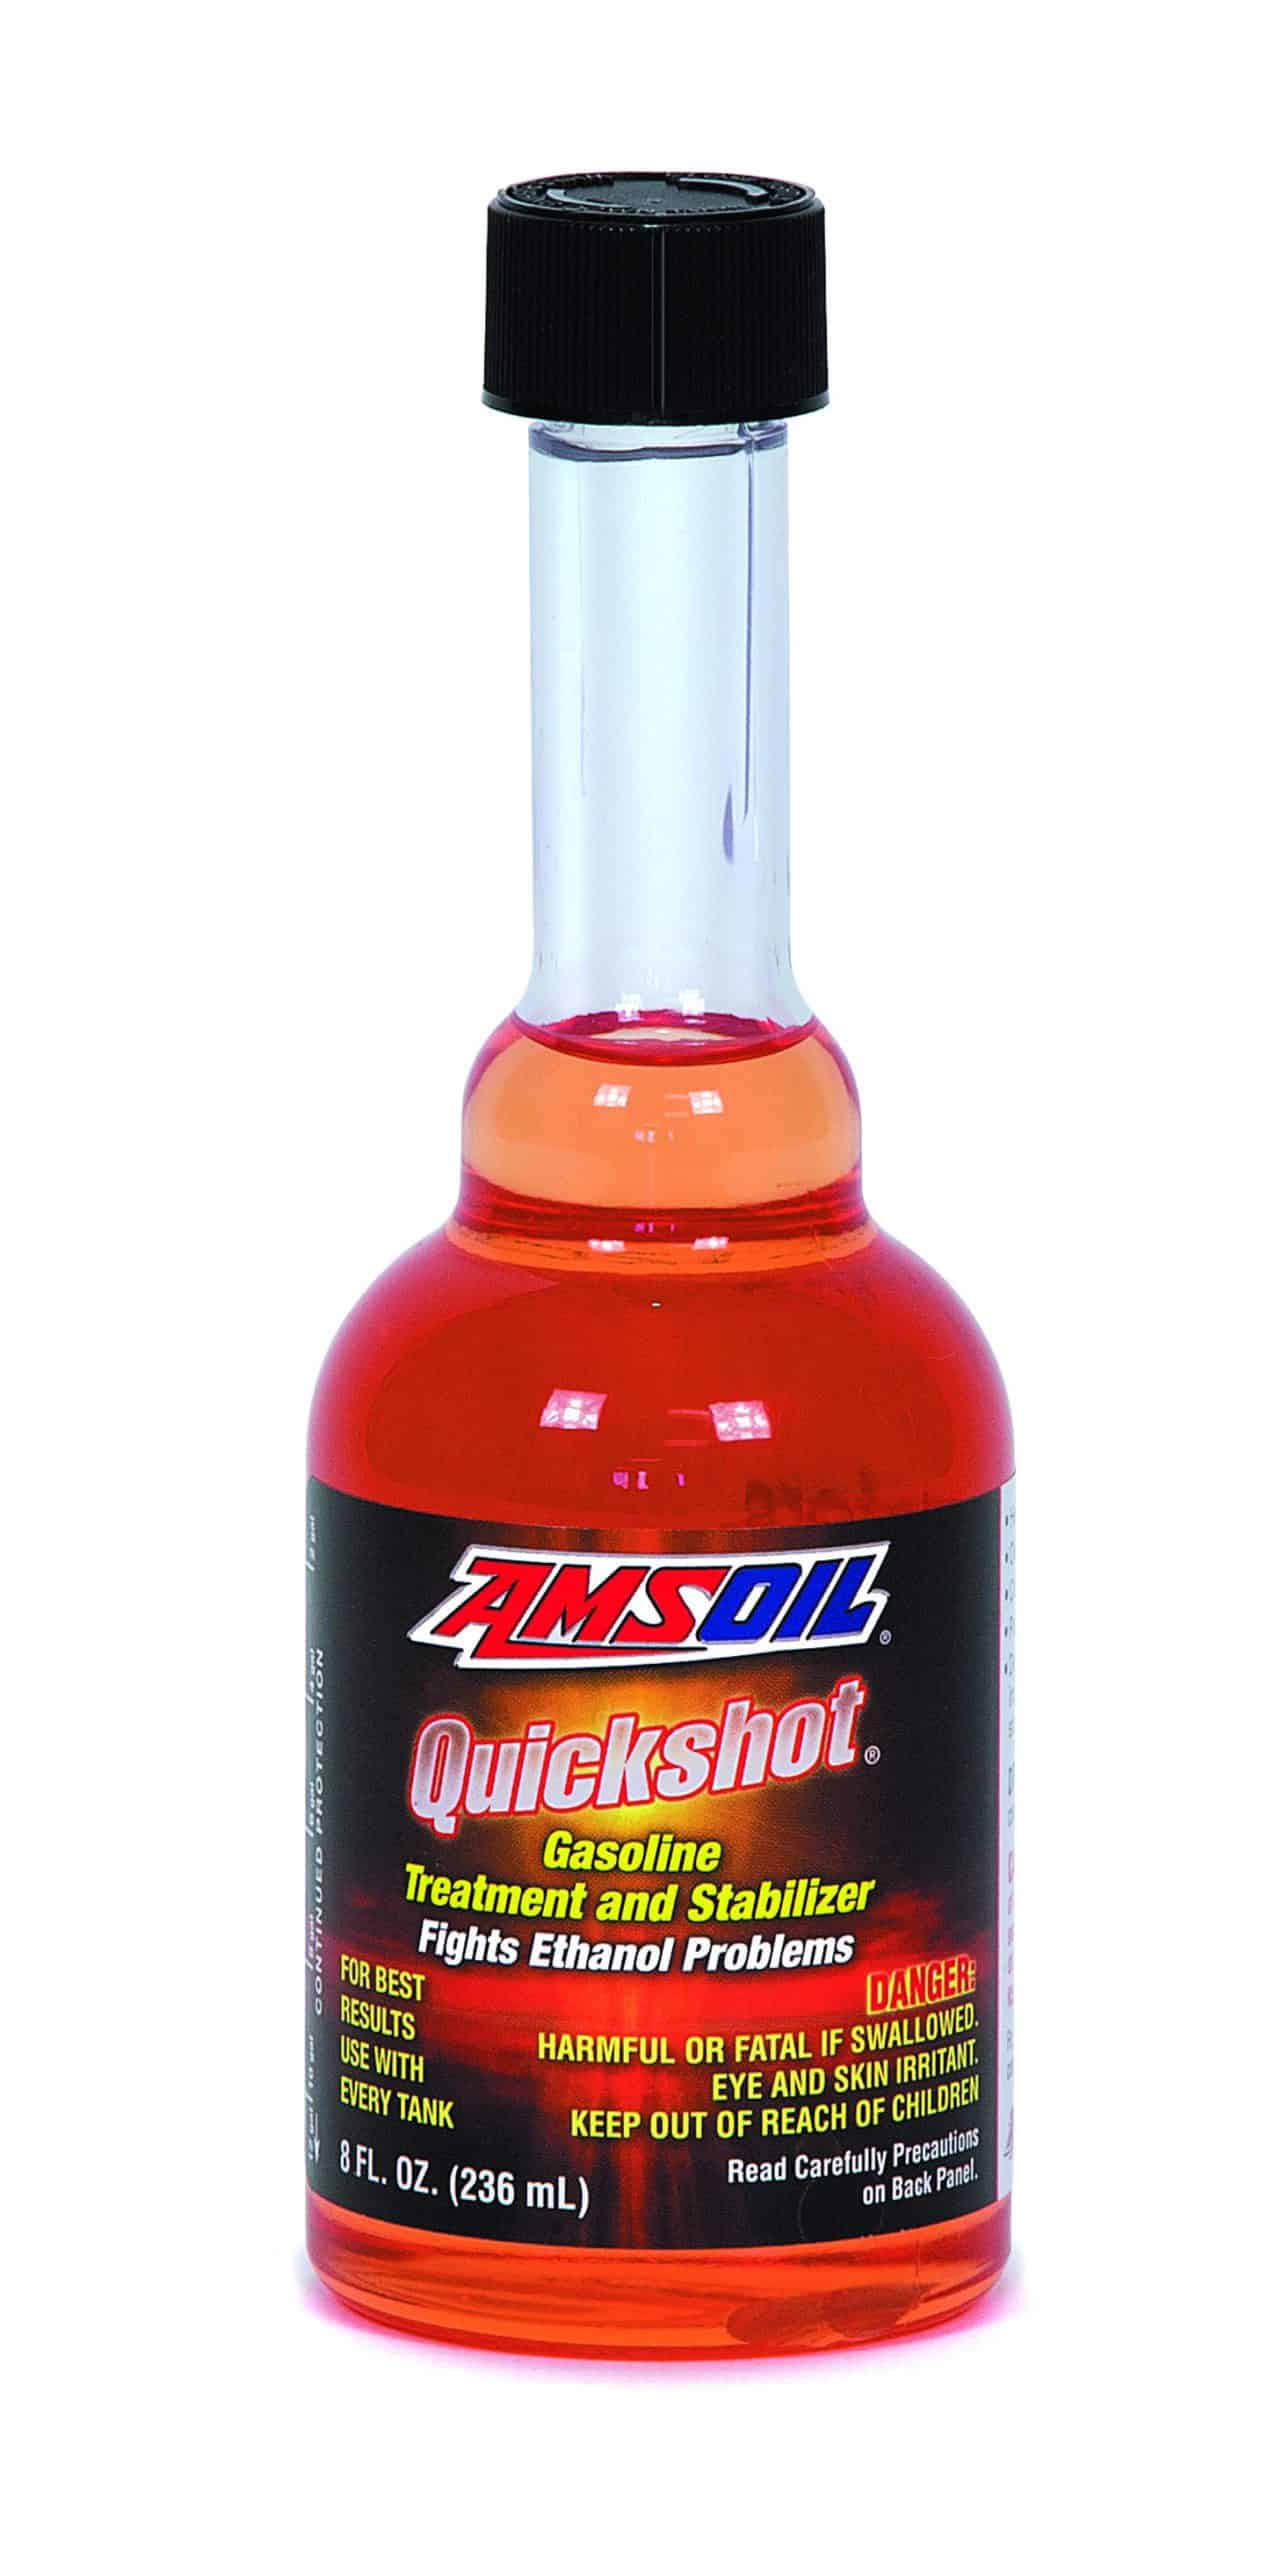 A bottle of AMSOIL Quickshot®, which is formulated to thoroughly clean & restore peak performance in small-engine & powersports equipment fuel systems.